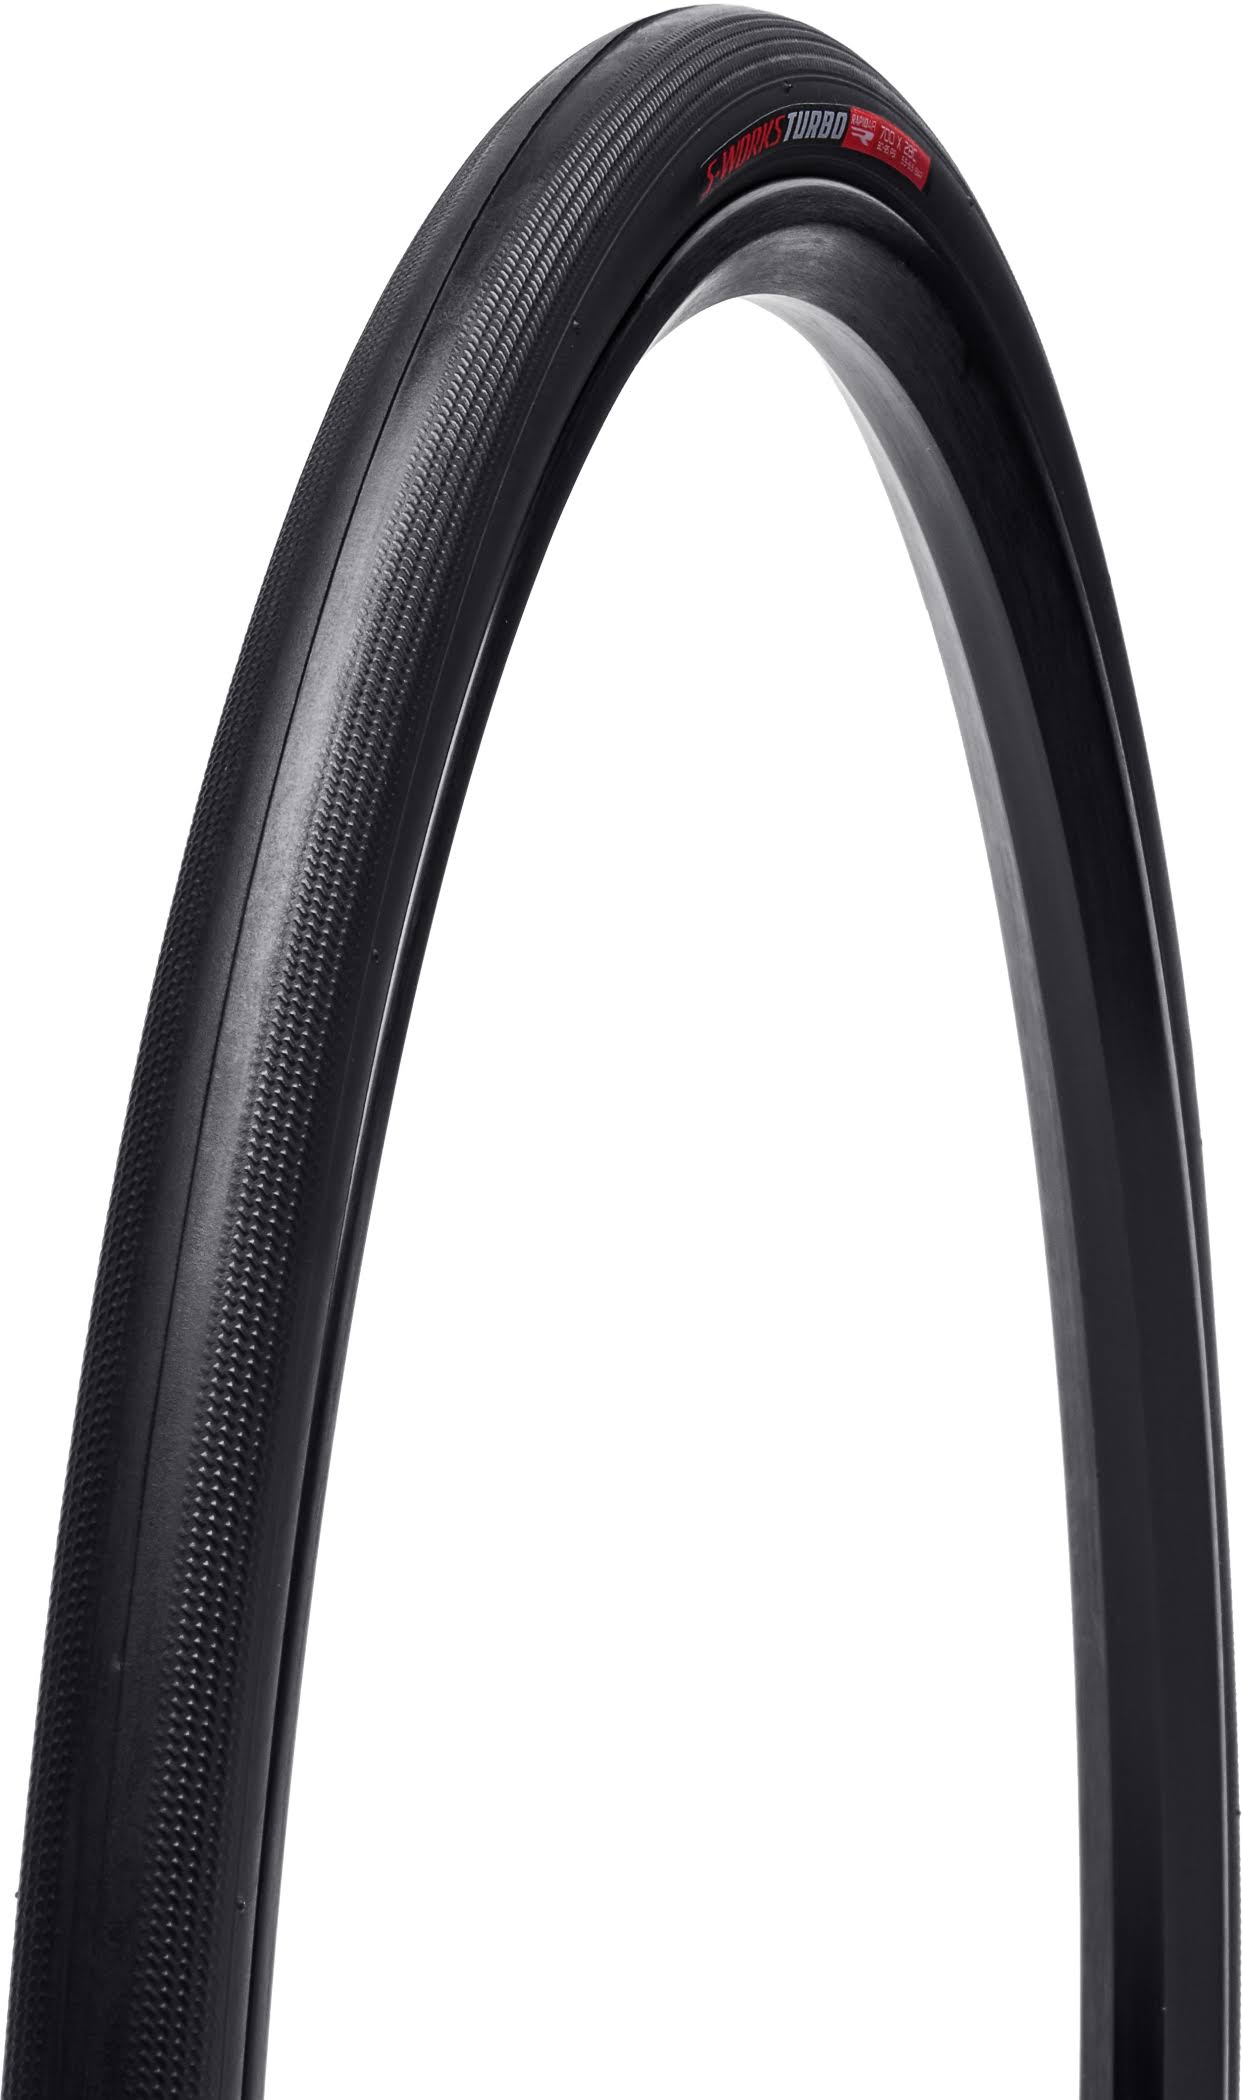 Specialized S-Works Turbo RapidAir Tubeless Ready Road Tyre Black